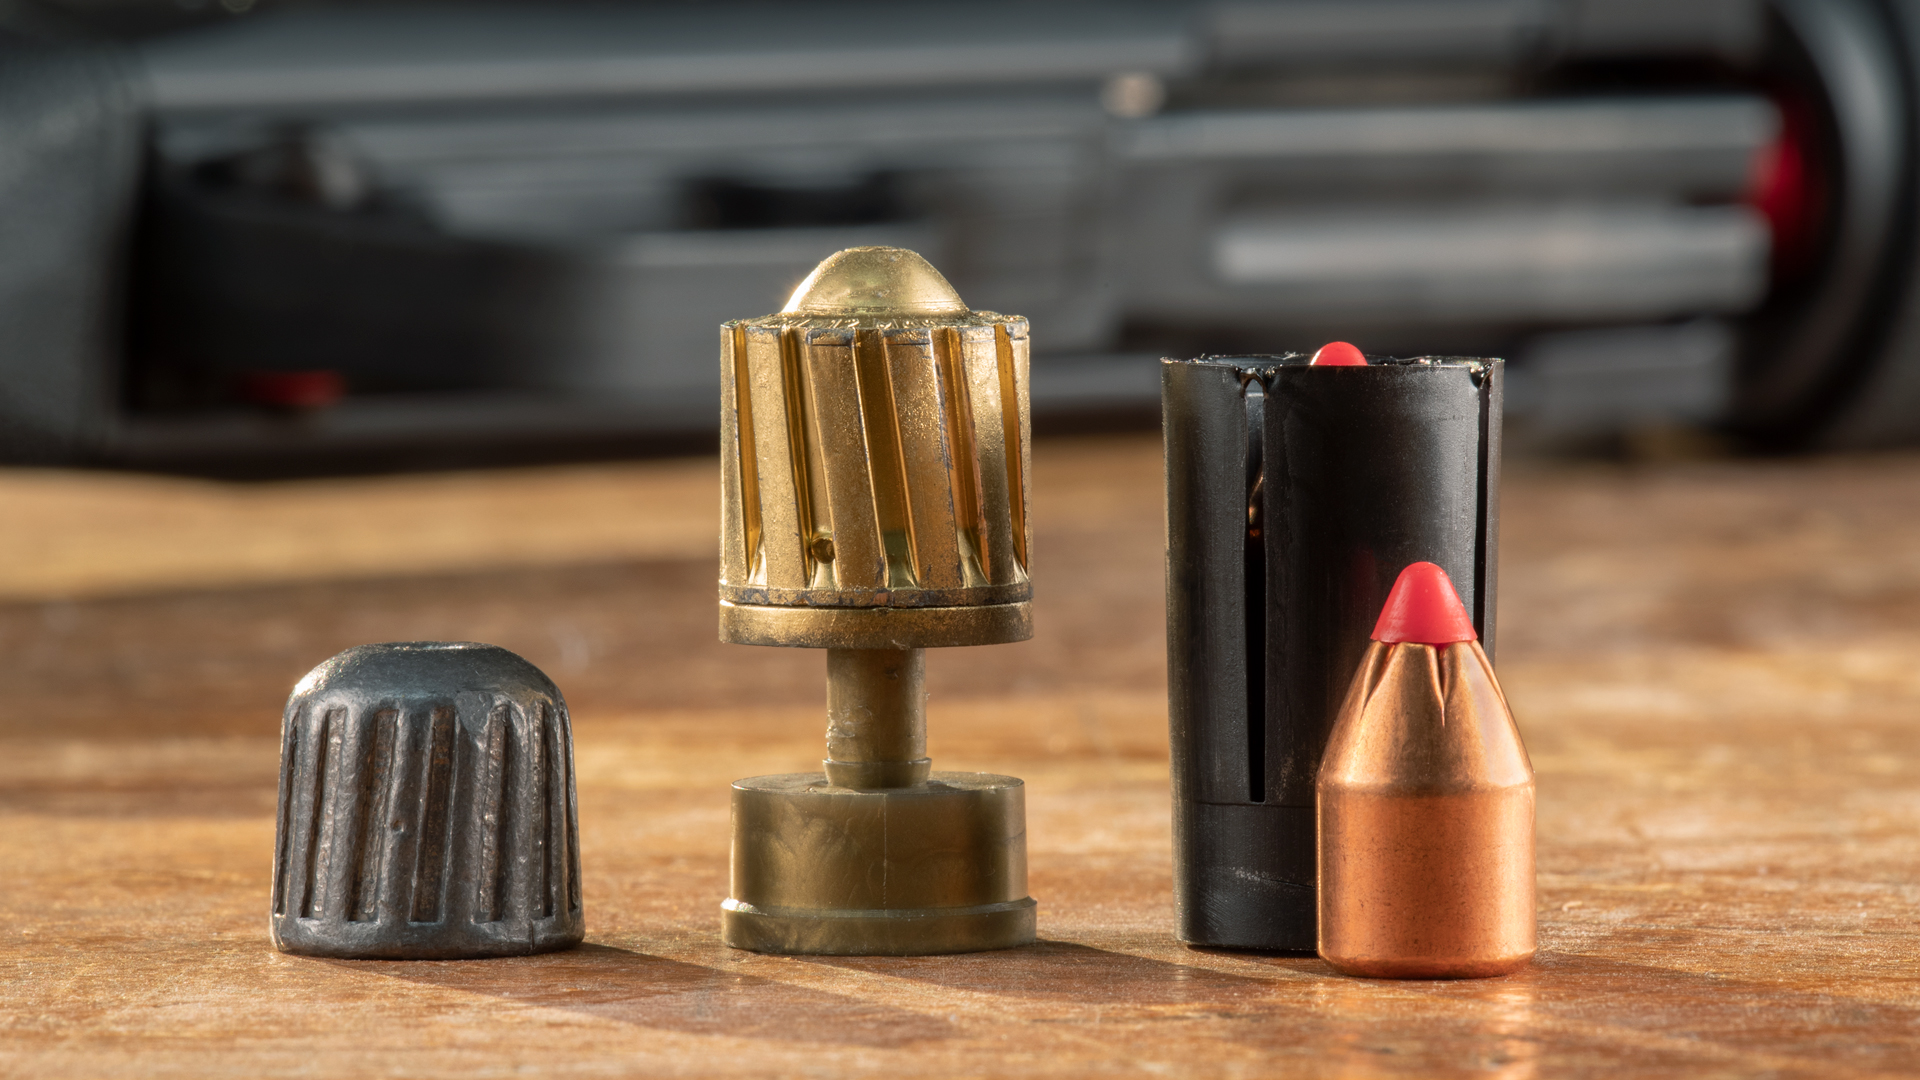 Is there a reason why some shotgun shells have different colors